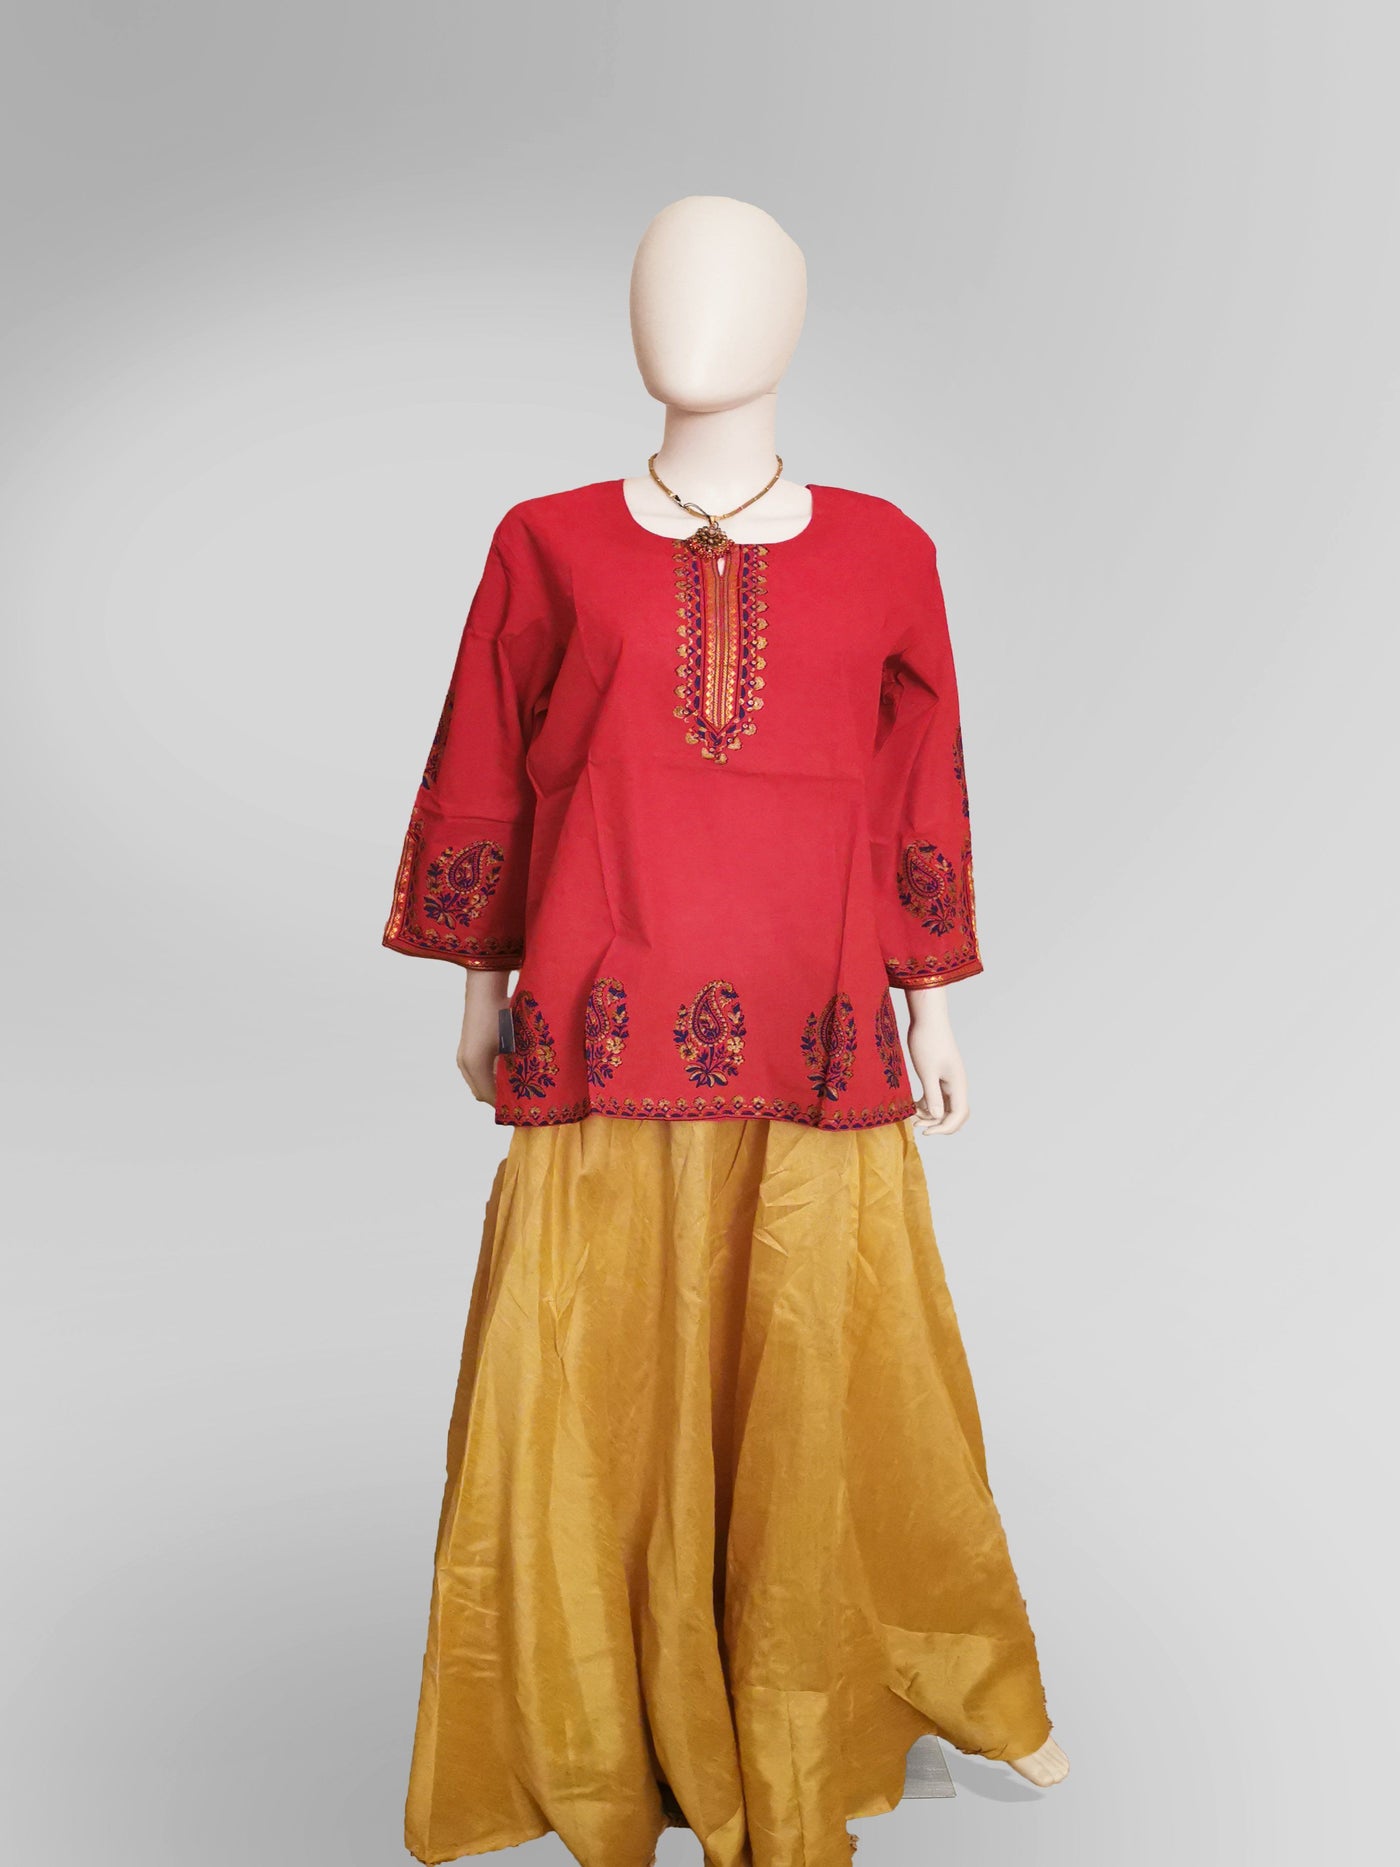 3/4 Sleeve Kurti Top in Tomato Red Indian Clothing in Denver, CO, Aurora, CO, Boulder, CO, Fort Collins, CO, Colorado Springs, CO, Parker, CO, Highlands Ranch, CO, Cherry Creek, CO, Centennial, CO, and Longmont, CO. NATIONWIDE SHIPPING USA- India Fashion X